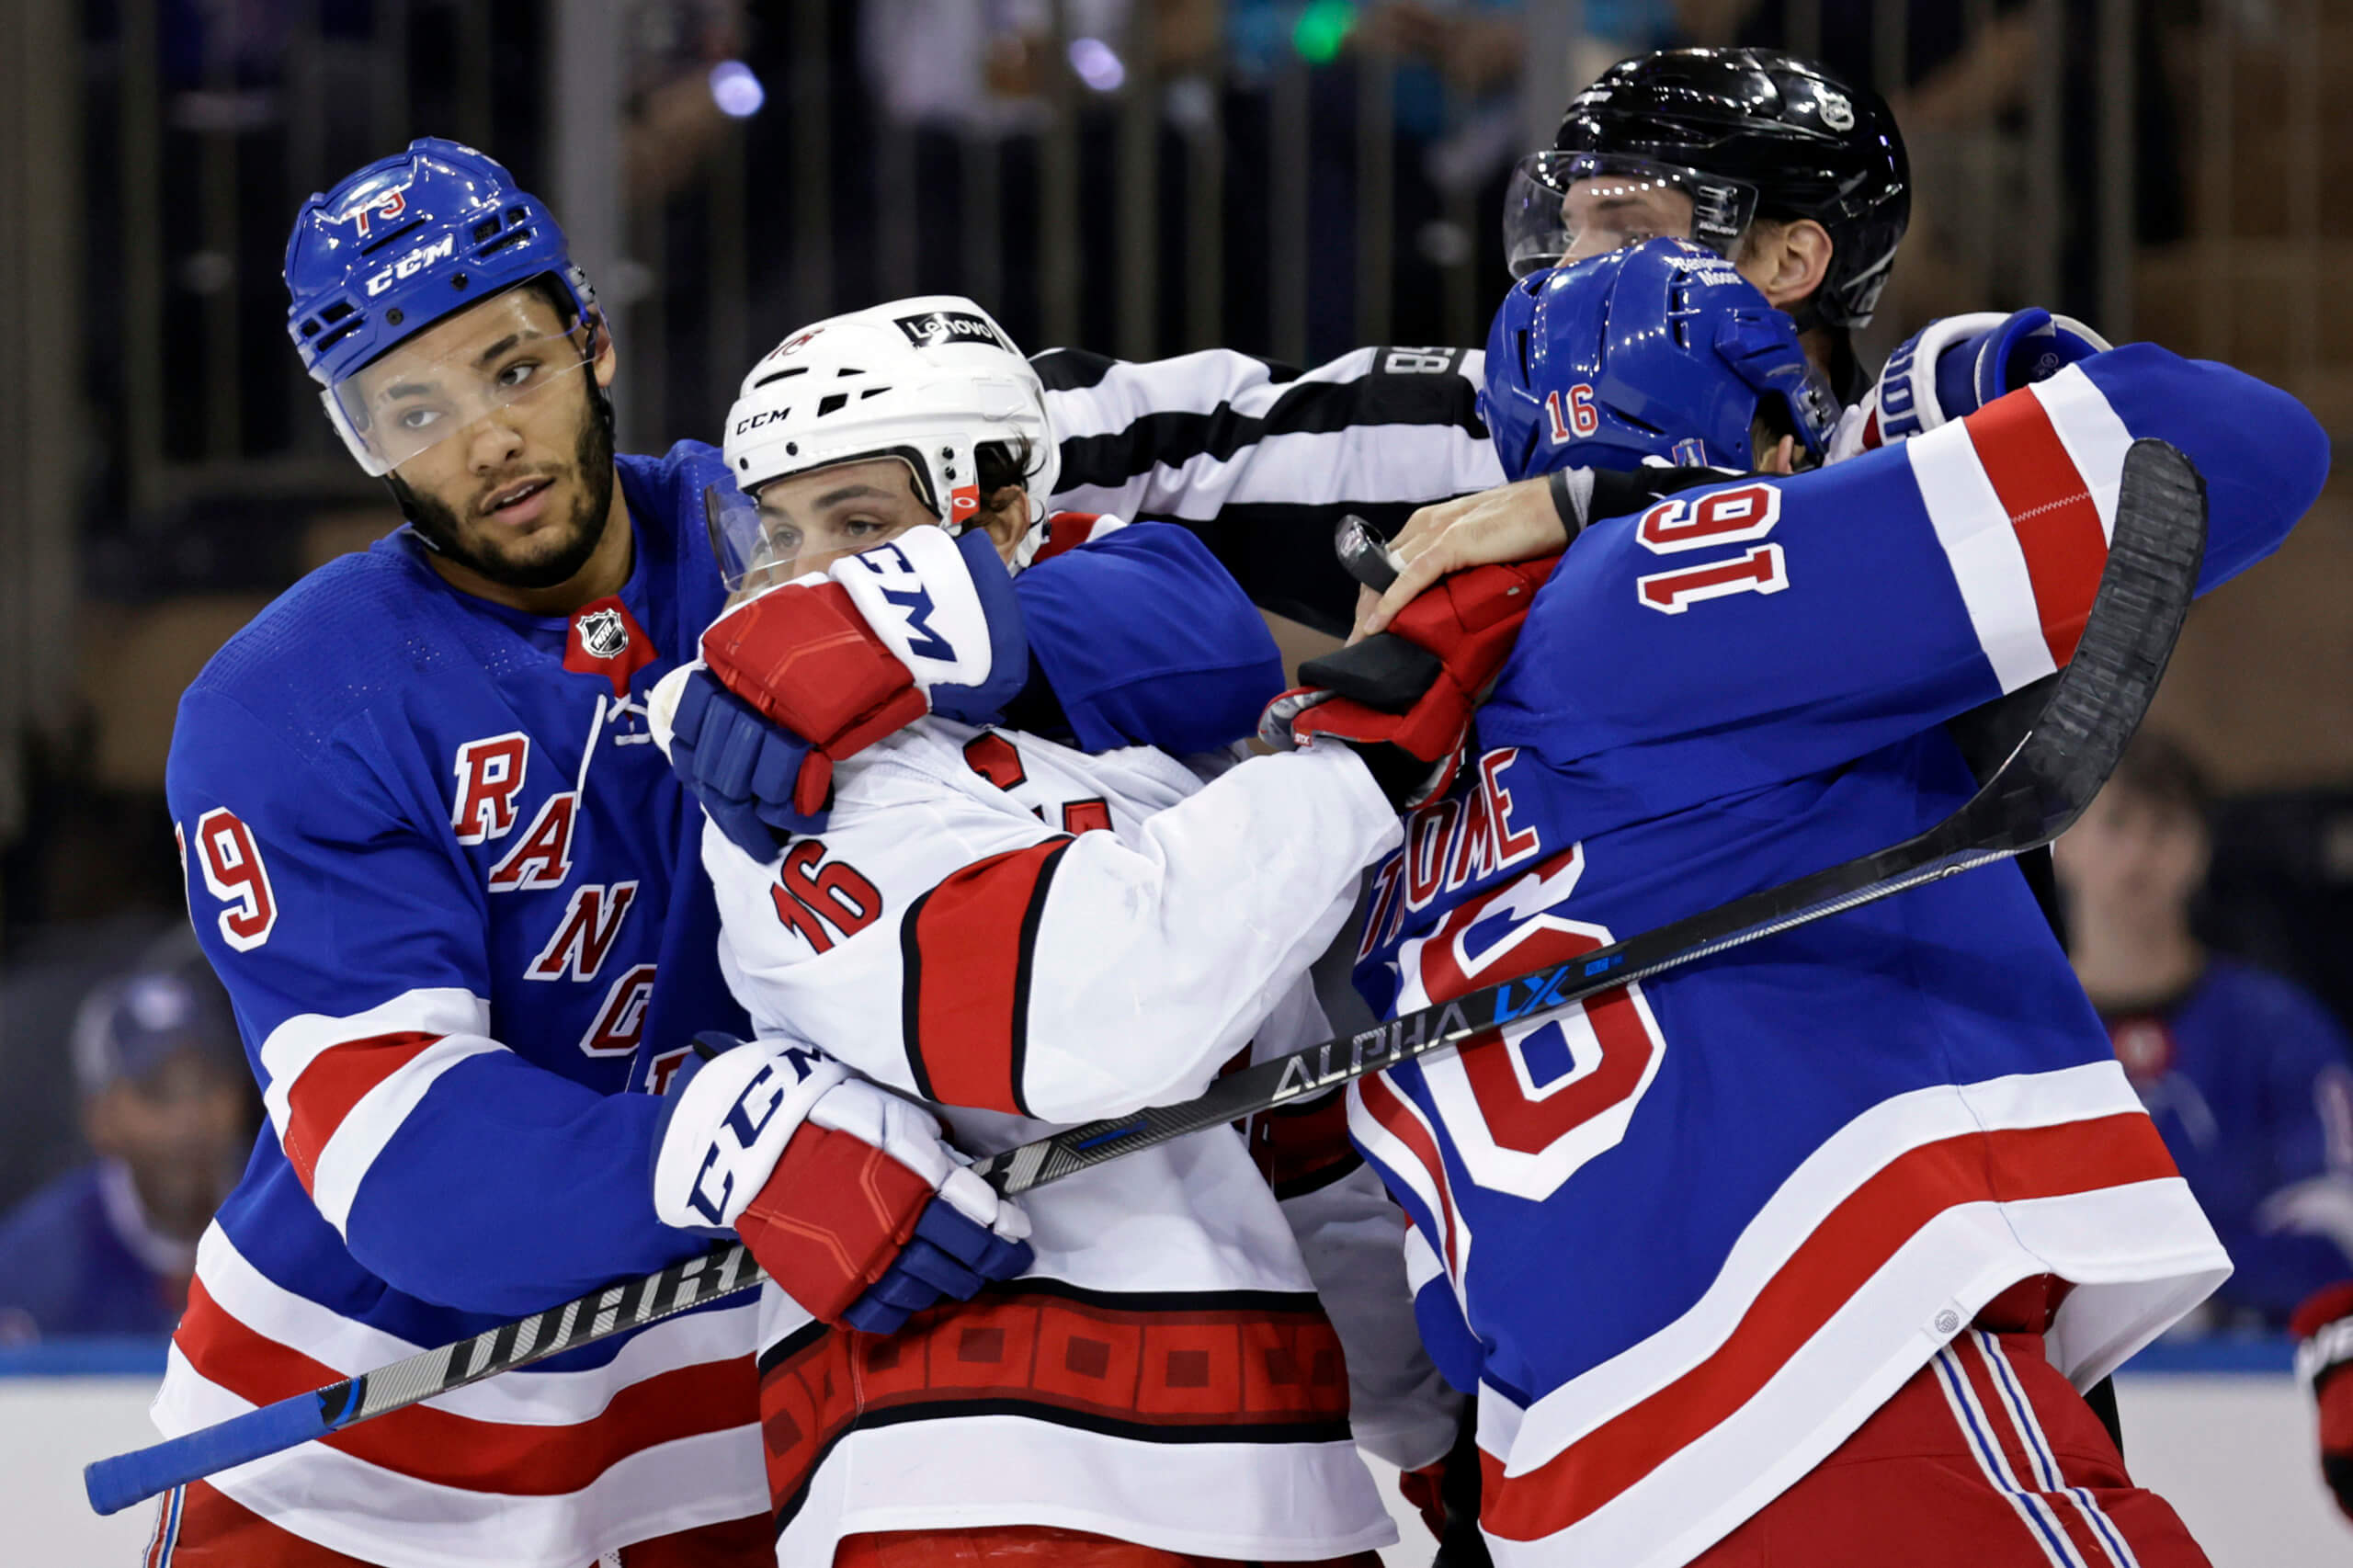 Cyclones enter into affiliation with New York Rangers